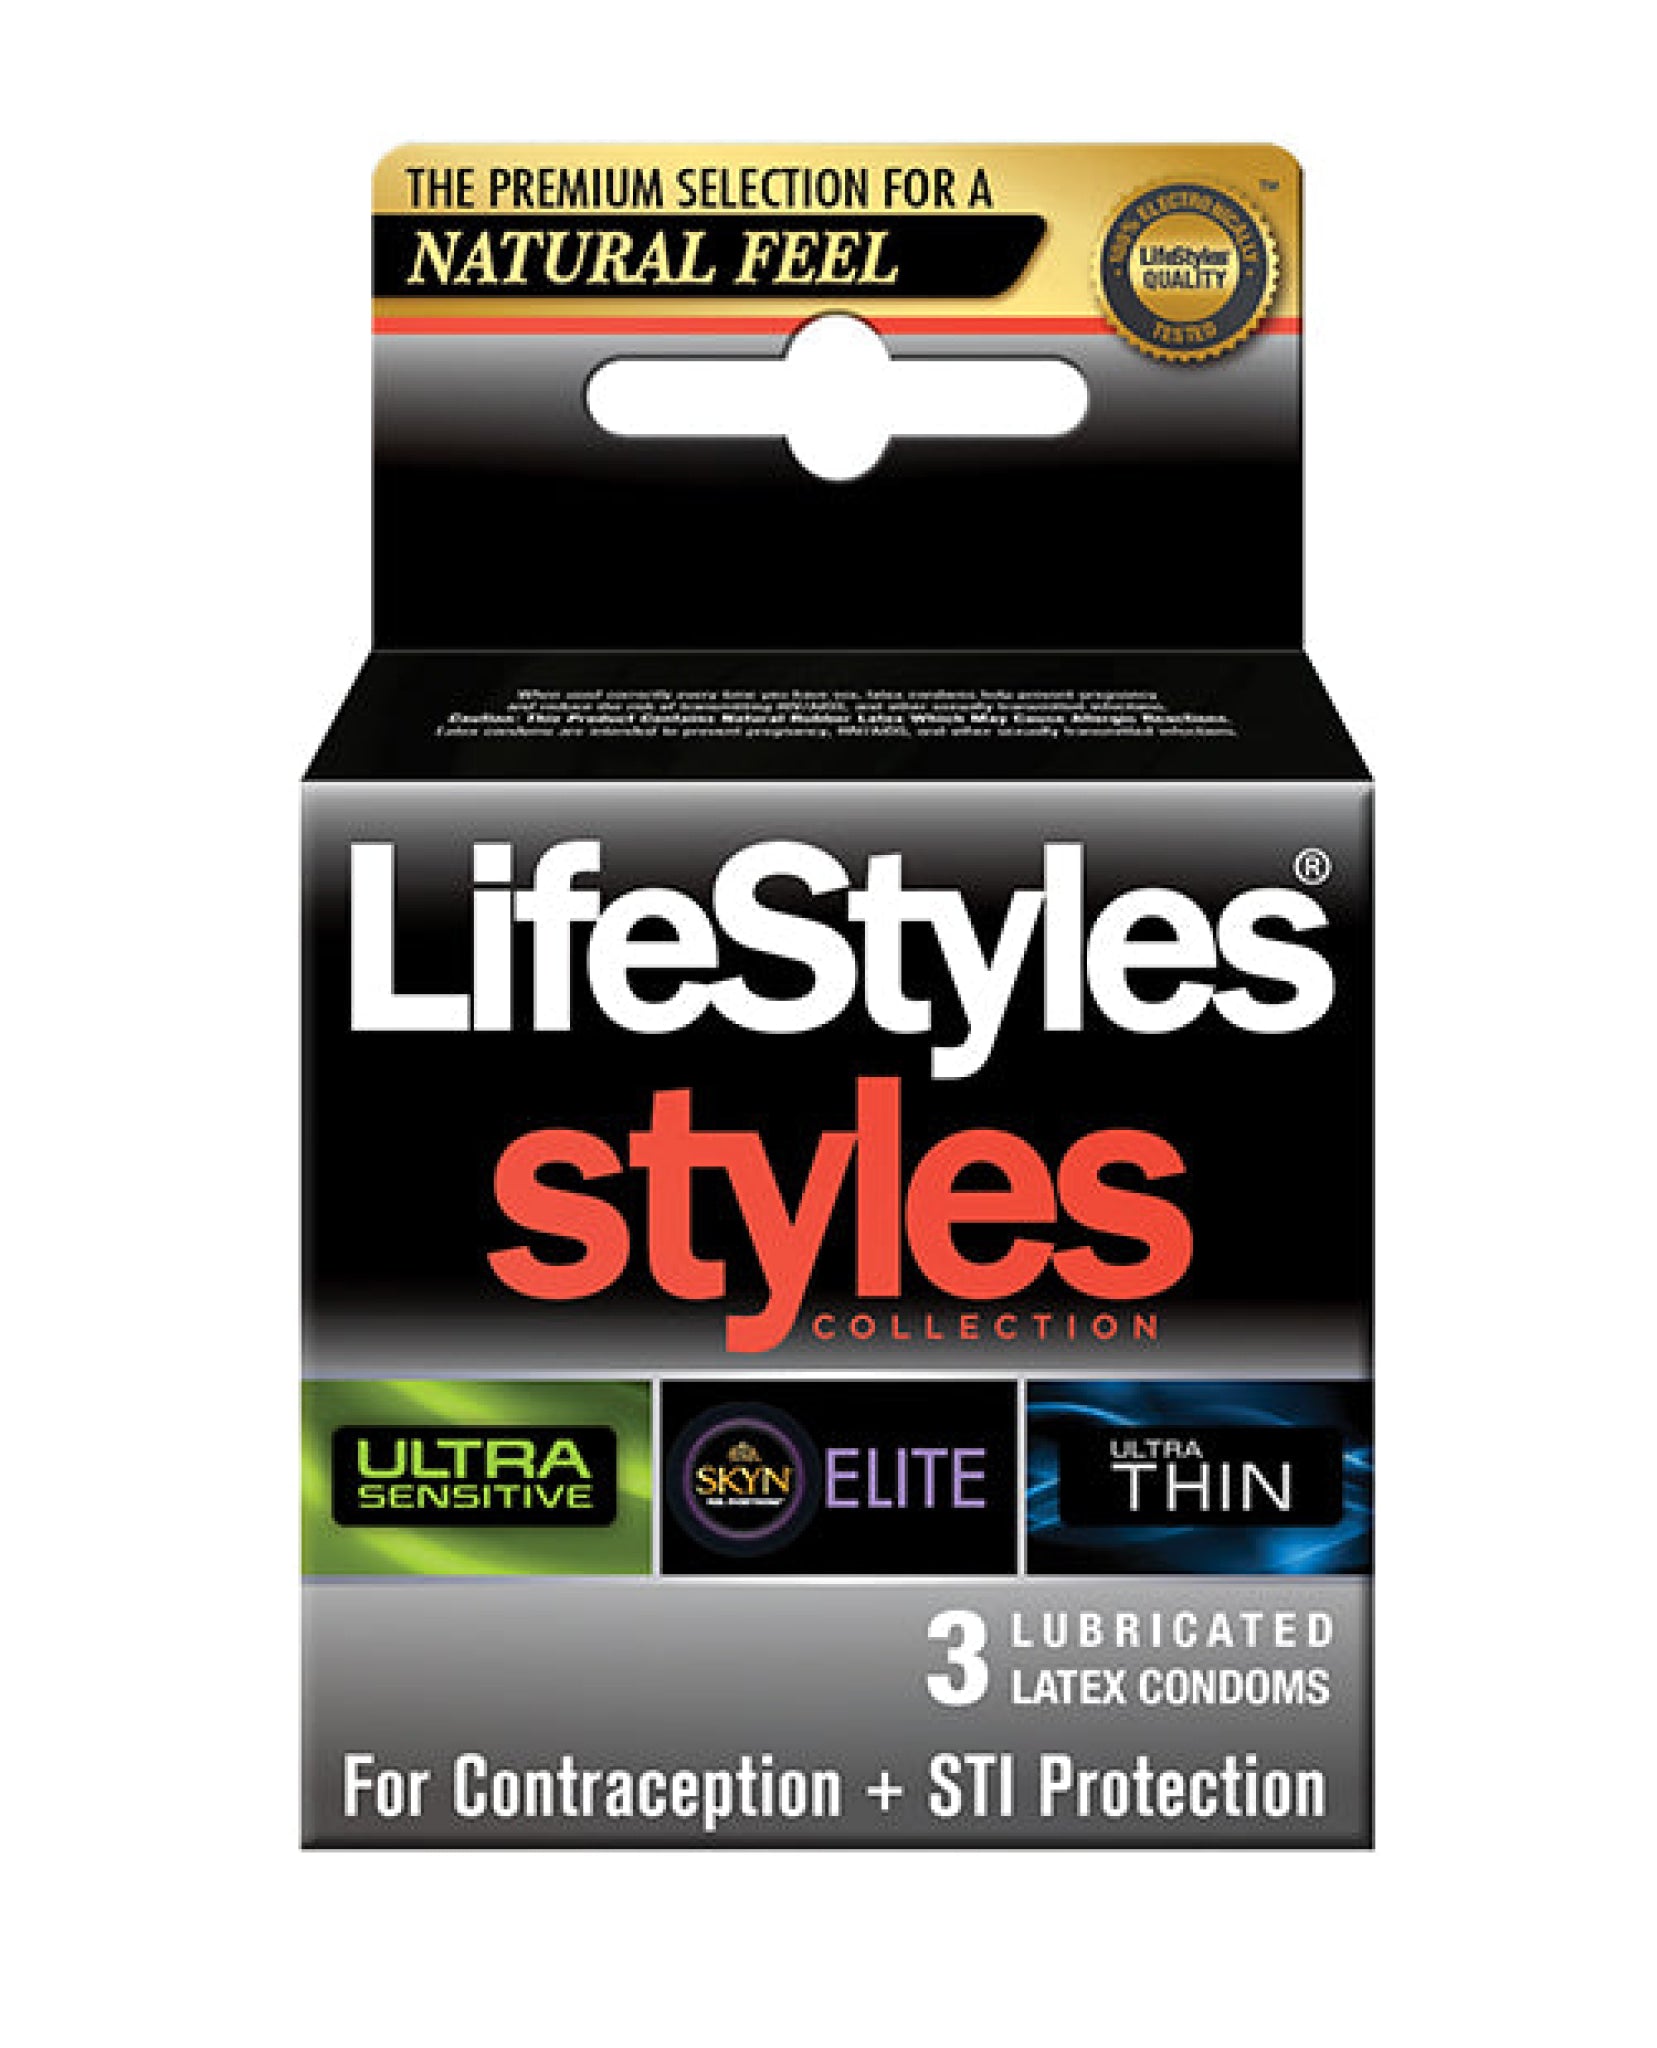 Lifestyles Styles 3-in-1 Collection - Pack Of 3 Lifestyles